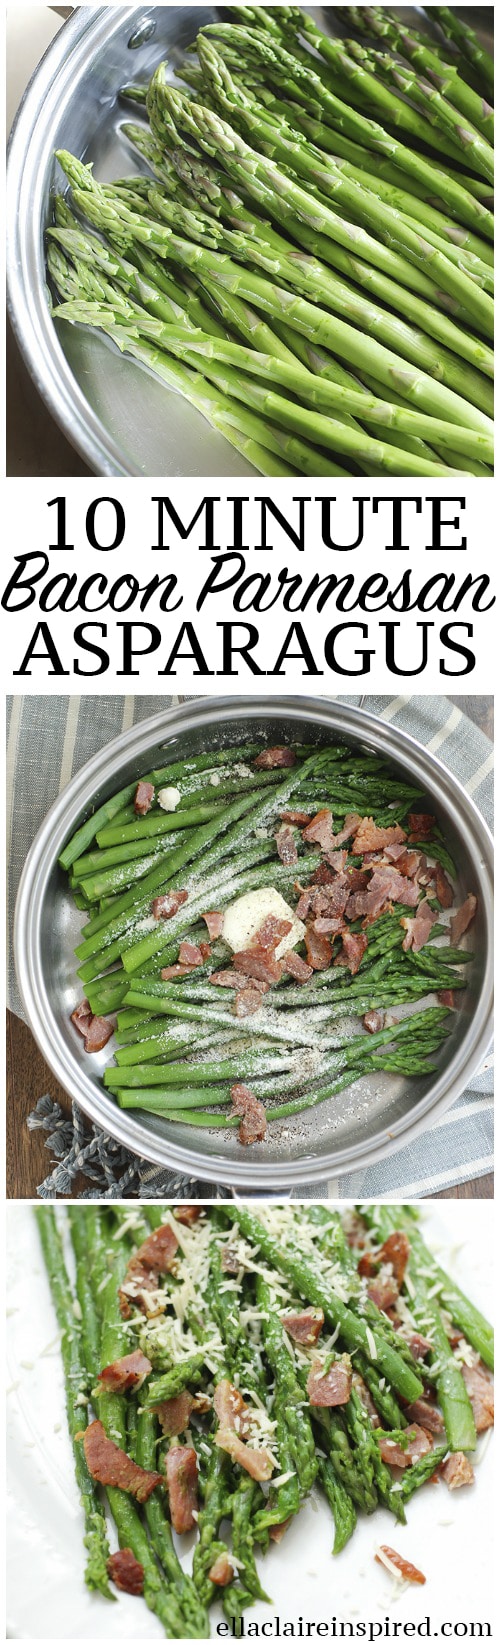 No more mushy flavorless asparagus! This easy 10 minute bacon and parmesan asparagus is so delicious! A total crowd pleaser 